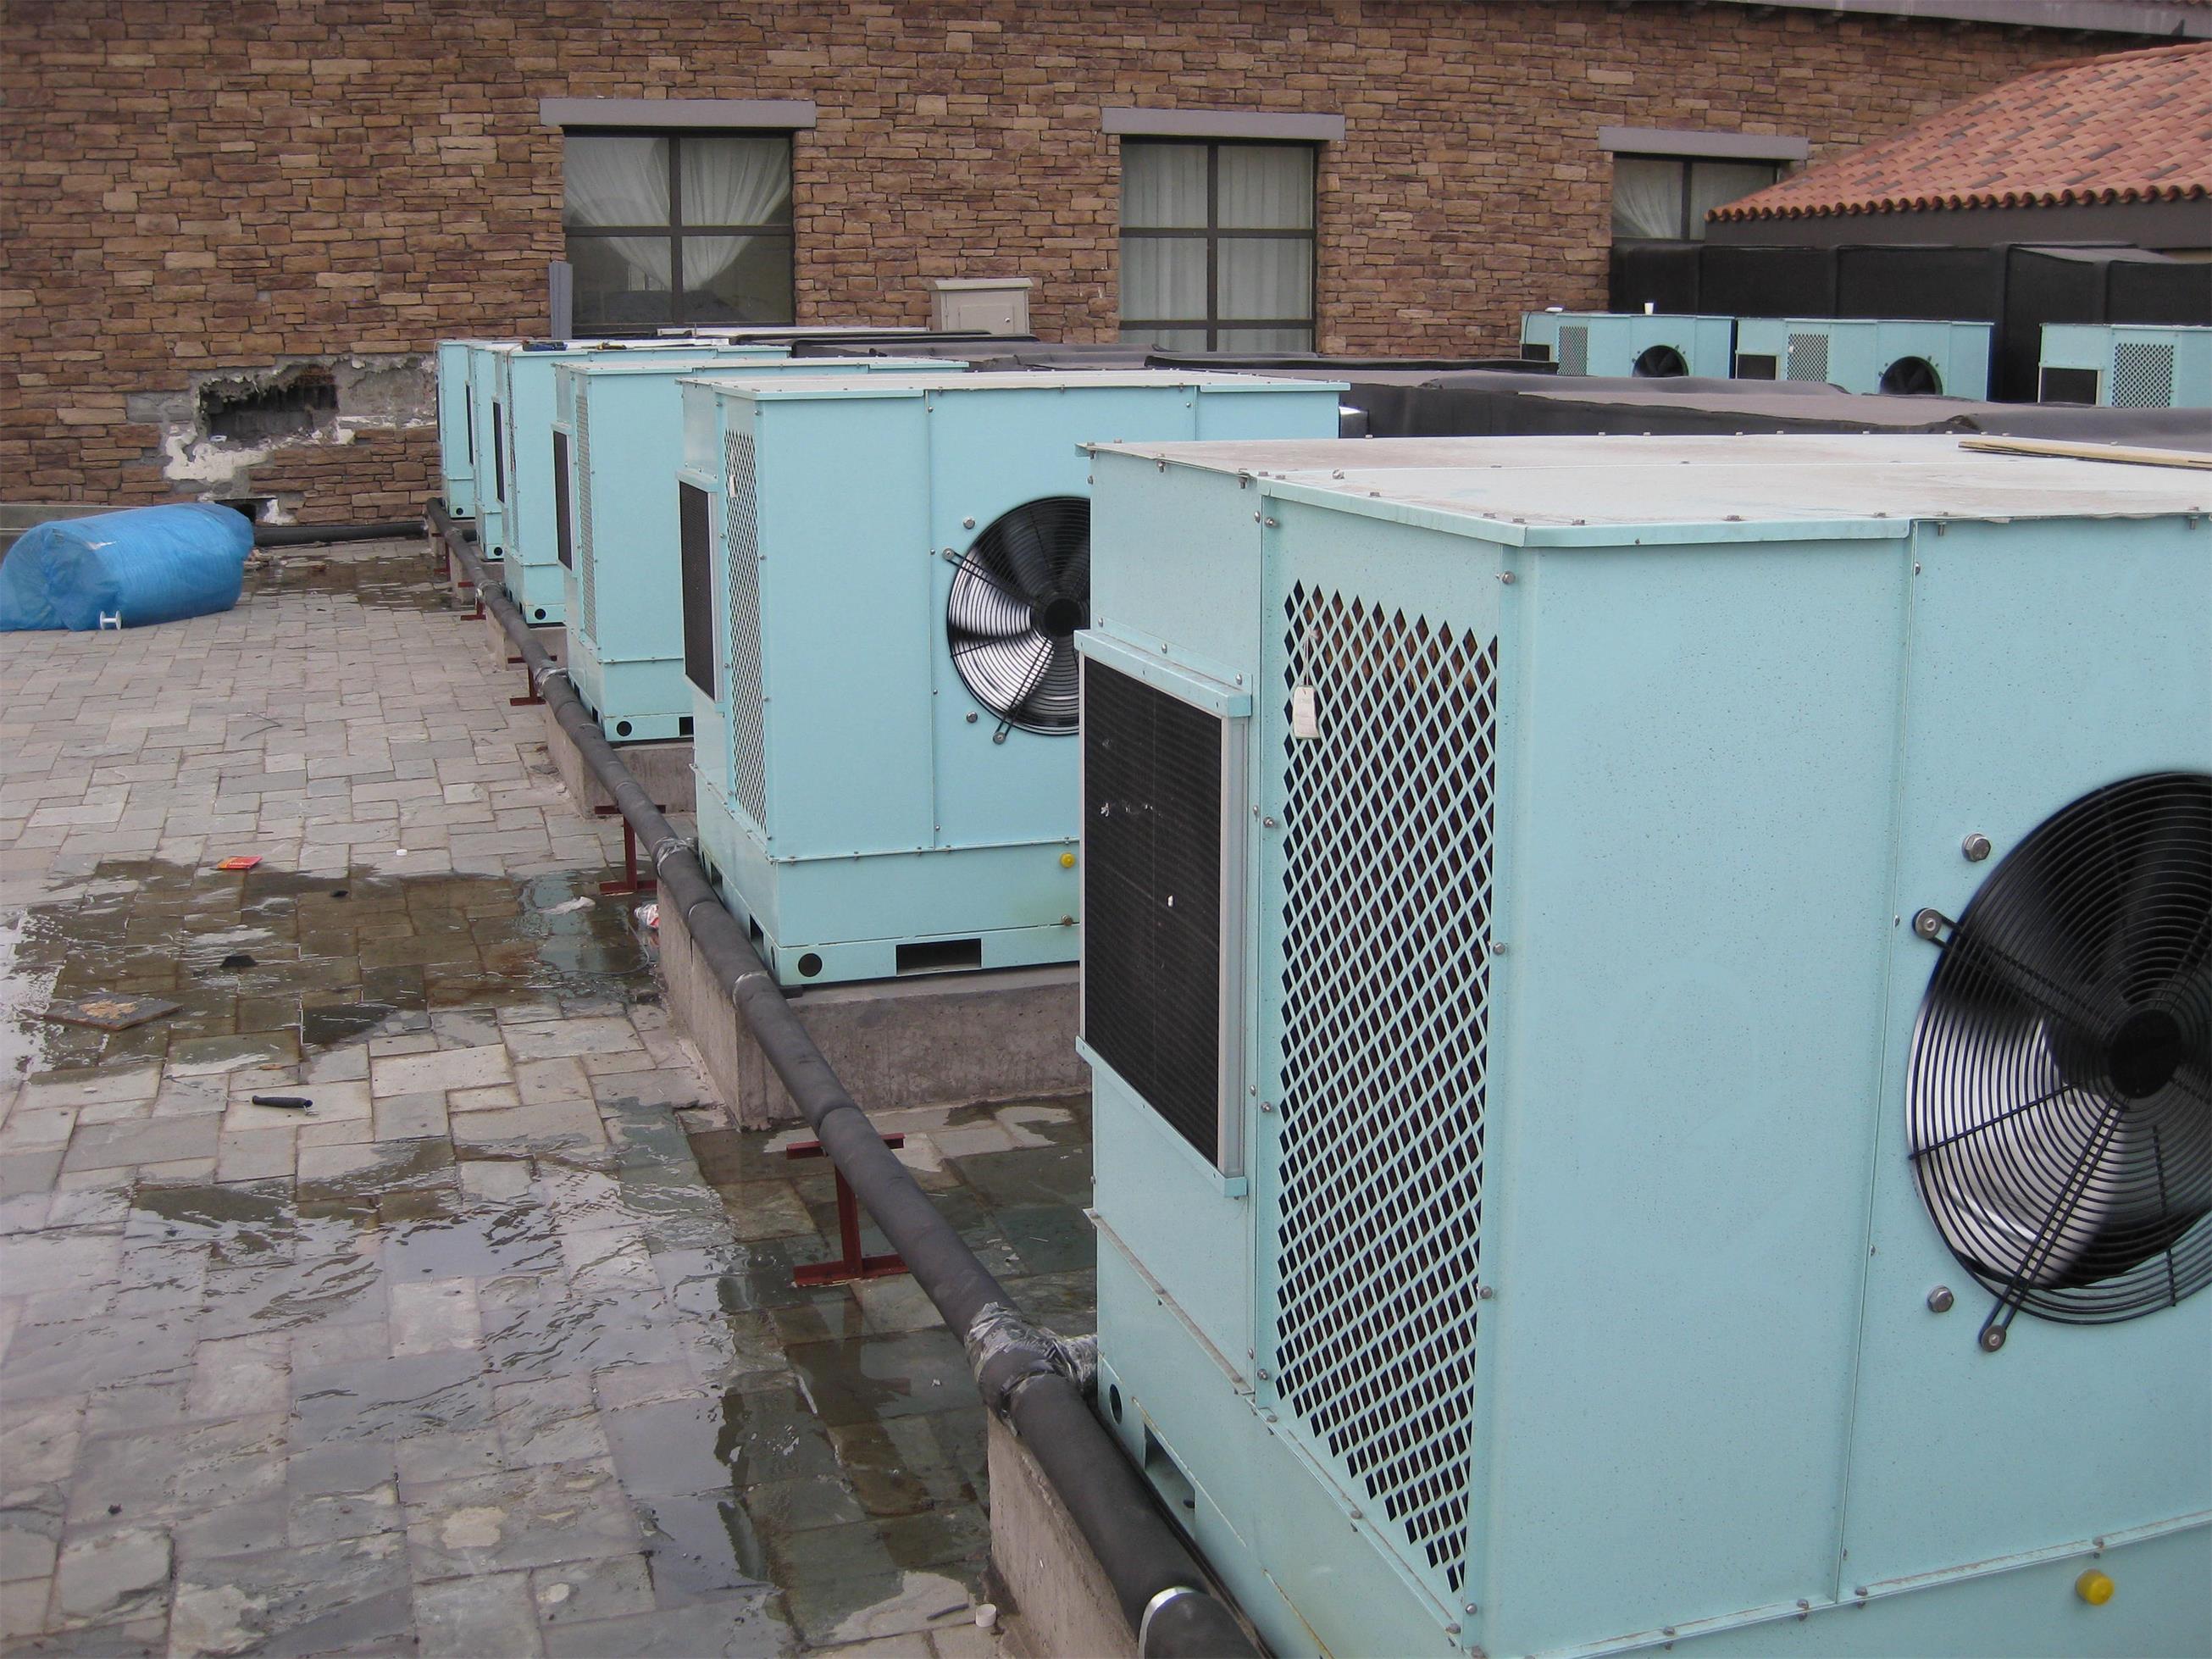 6、Inner Mongolia Hon-refrigerant Air Conditioning Project   （Utility Model Patent Number：201020651062.6）